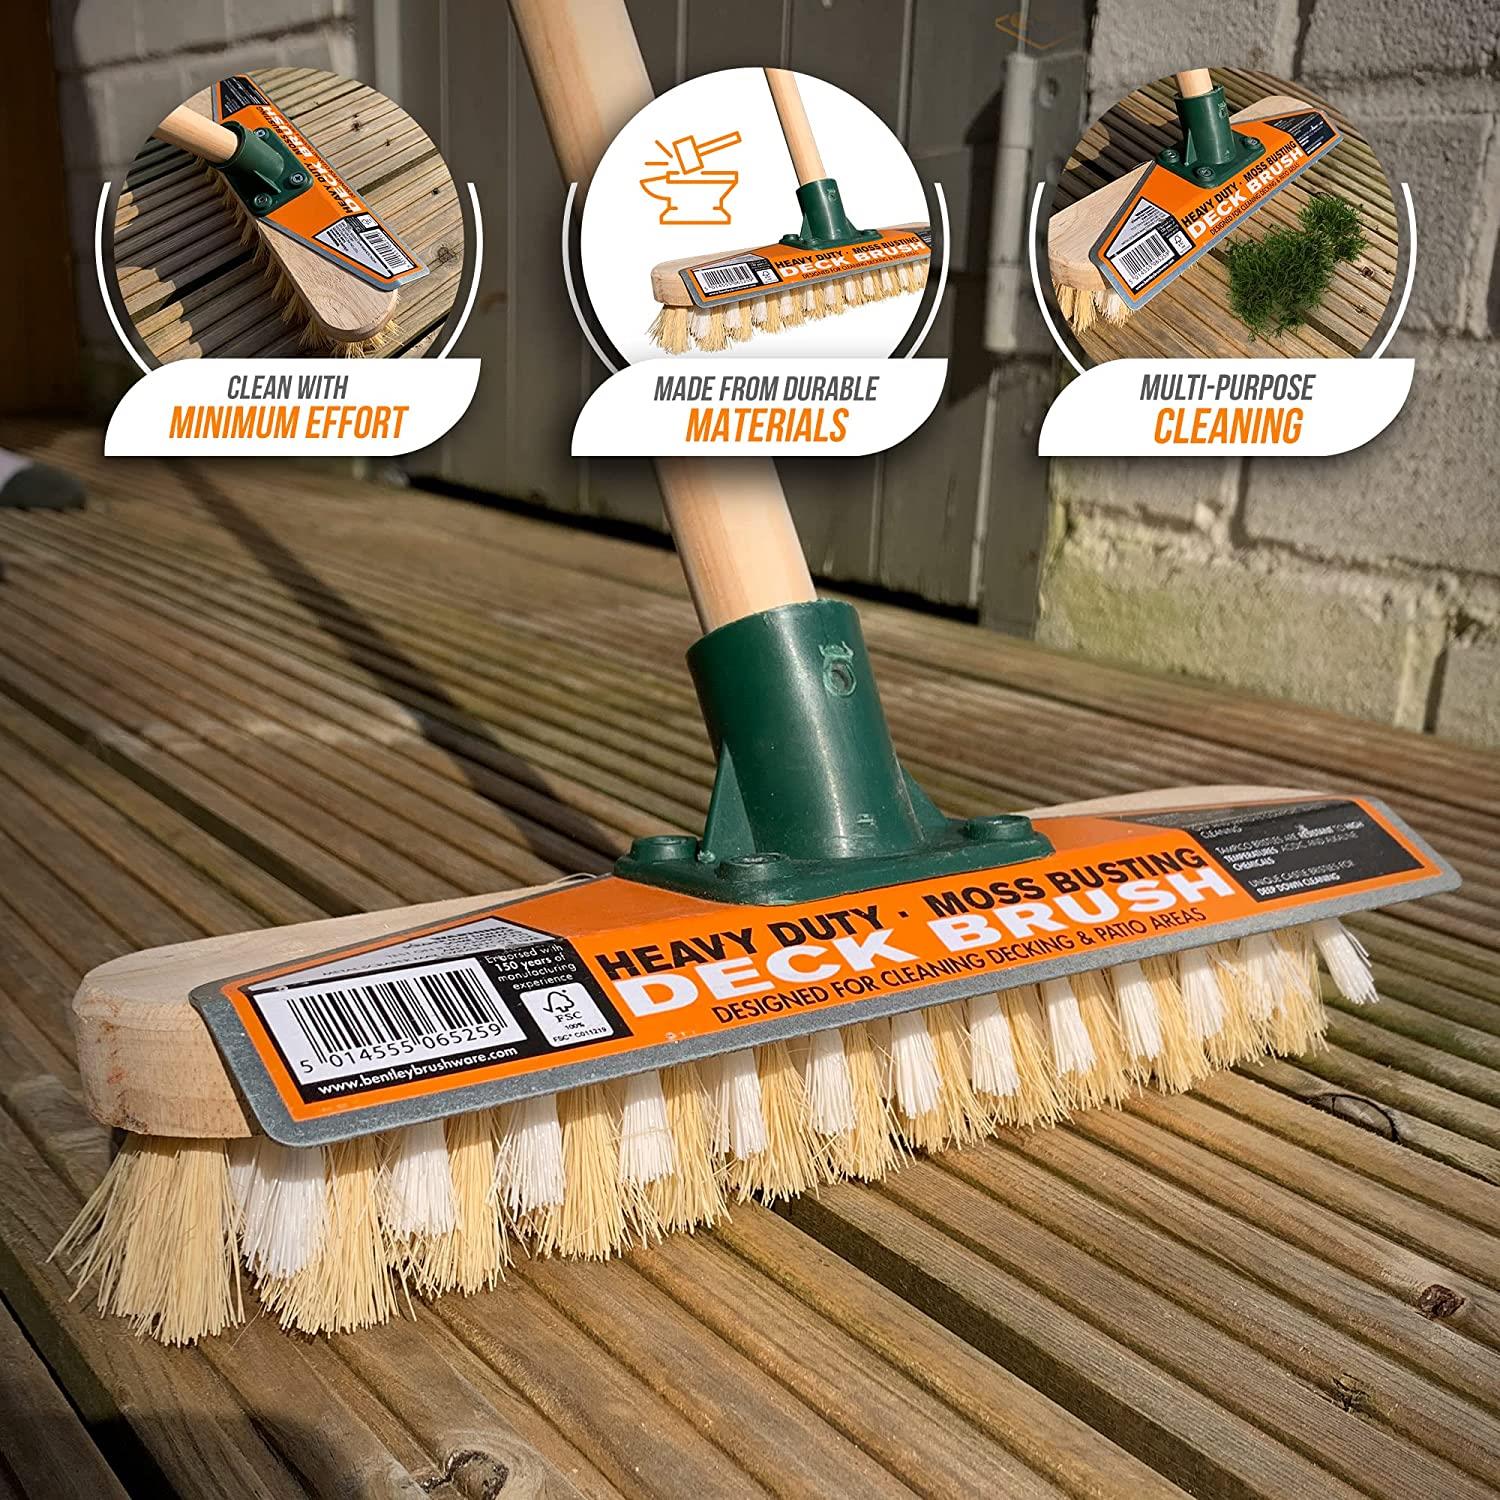 TDBS Decking Castle Brush with Handle